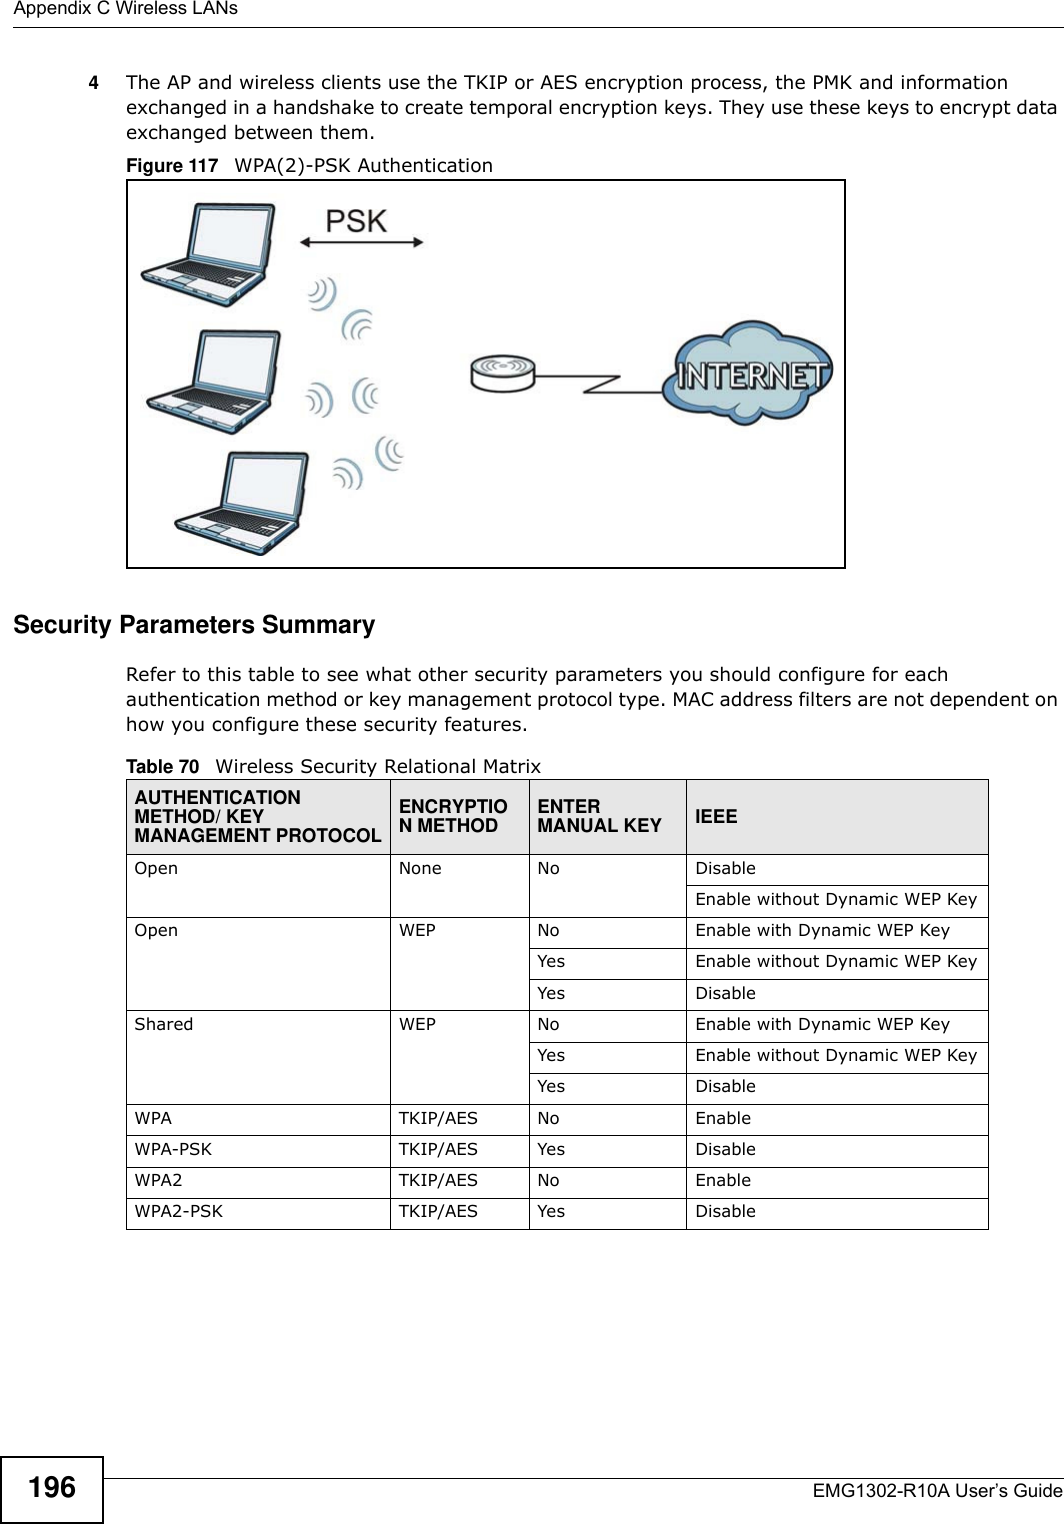 Appendix C Wireless LANsEMG1302-R10A User’s Guide1964The AP and wireless clients use the TKIP or AES encryption process, the PMK and information exchanged in a handshake to create temporal encryption keys. They use these keys to encrypt data exchanged between them.Figure 117   WPA(2)-PSK AuthenticationSecurity Parameters SummaryRefer to this table to see what other security parameters you should configure for each authentication method or key management protocol type. MAC address filters are not dependent on how you configure these security features.Table 70   Wireless Security Relational MatrixAUTHENTICATION METHOD/ KEY MANAGEMENT PROTOCOLENCRYPTION METHODENTER MANUAL KEY IEEEOpen None No DisableEnable without Dynamic WEP KeyOpen WEP No           Enable with Dynamic WEP KeyYes Enable without Dynamic WEP KeyYes DisableShared WEP  No           Enable with Dynamic WEP KeyYes Enable without Dynamic WEP KeyYes DisableWPA  TKIP/AES No EnableWPA-PSK  TKIP/AES Yes DisableWPA2 TKIP/AES No EnableWPA2-PSK  TKIP/AES Yes Disable